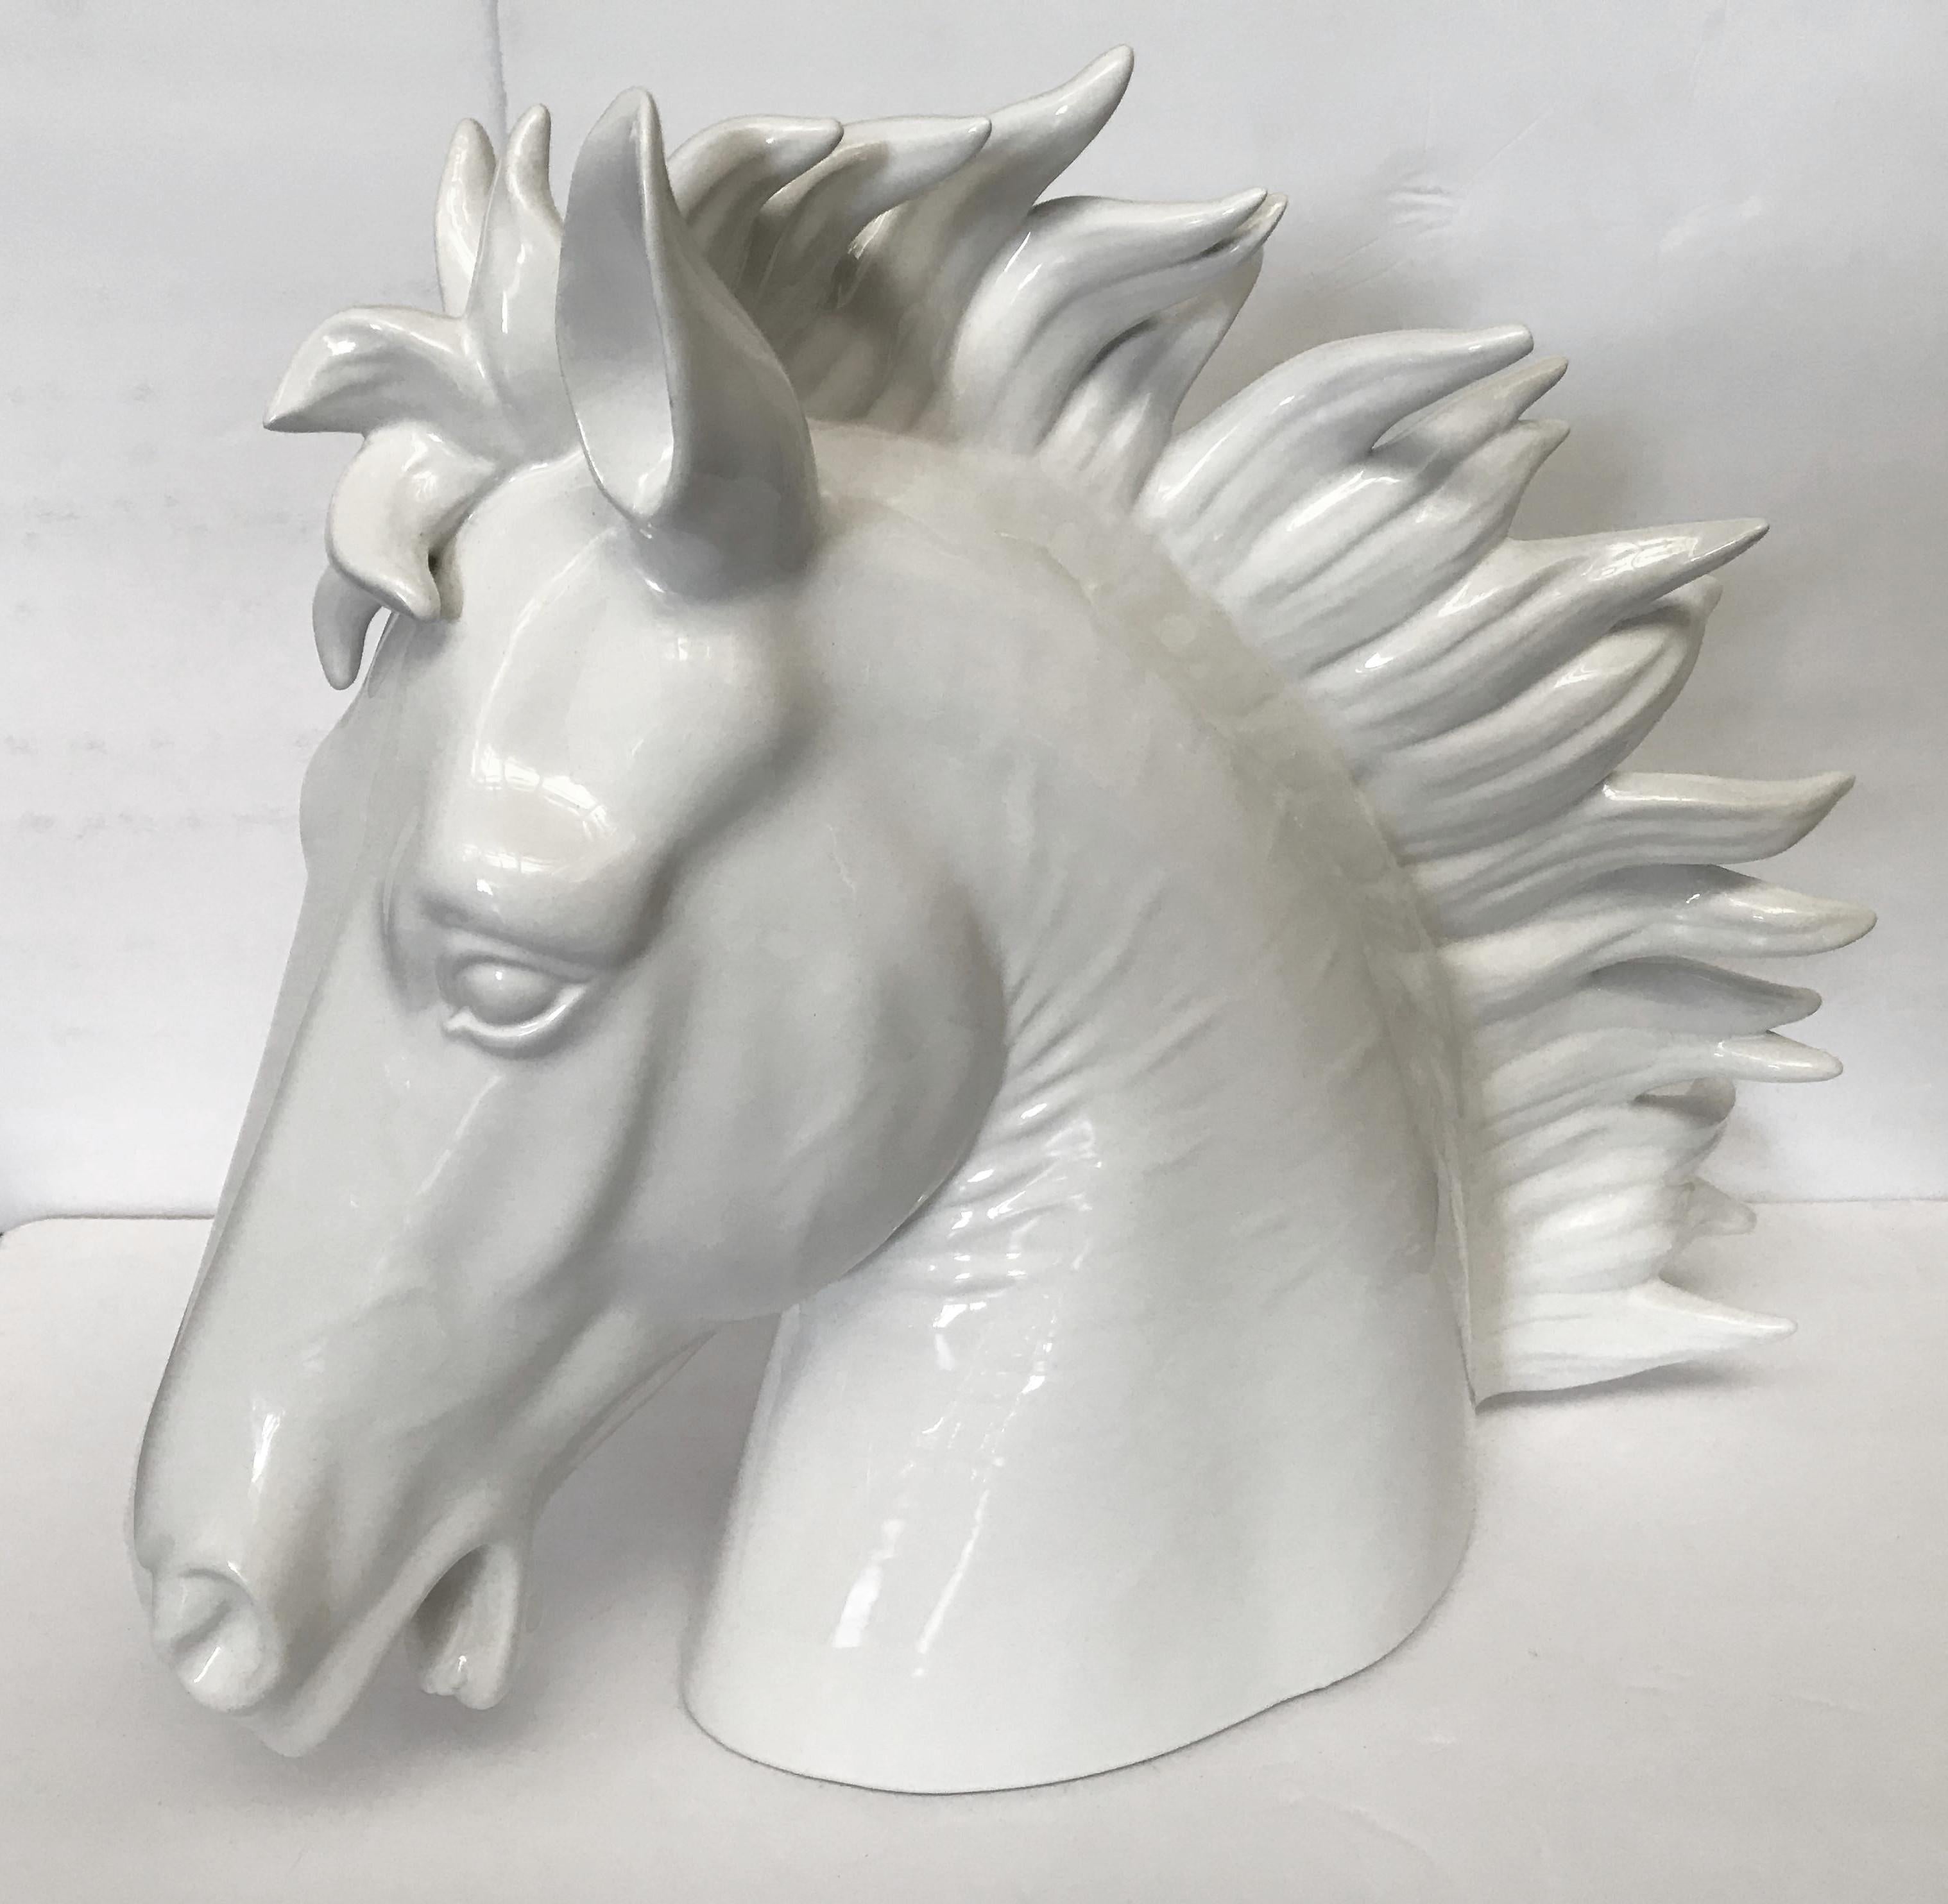 Italian white ceramic decorative horse head sculpture designed by Fabio Bergomi / Made in Italy
Measures: Height 16 inches, width 20 inches, depth 6 inches
1 in stock in Palm Springs currently on ON FINAL CLEARANCE SALE for $499 !!!
Order Reference